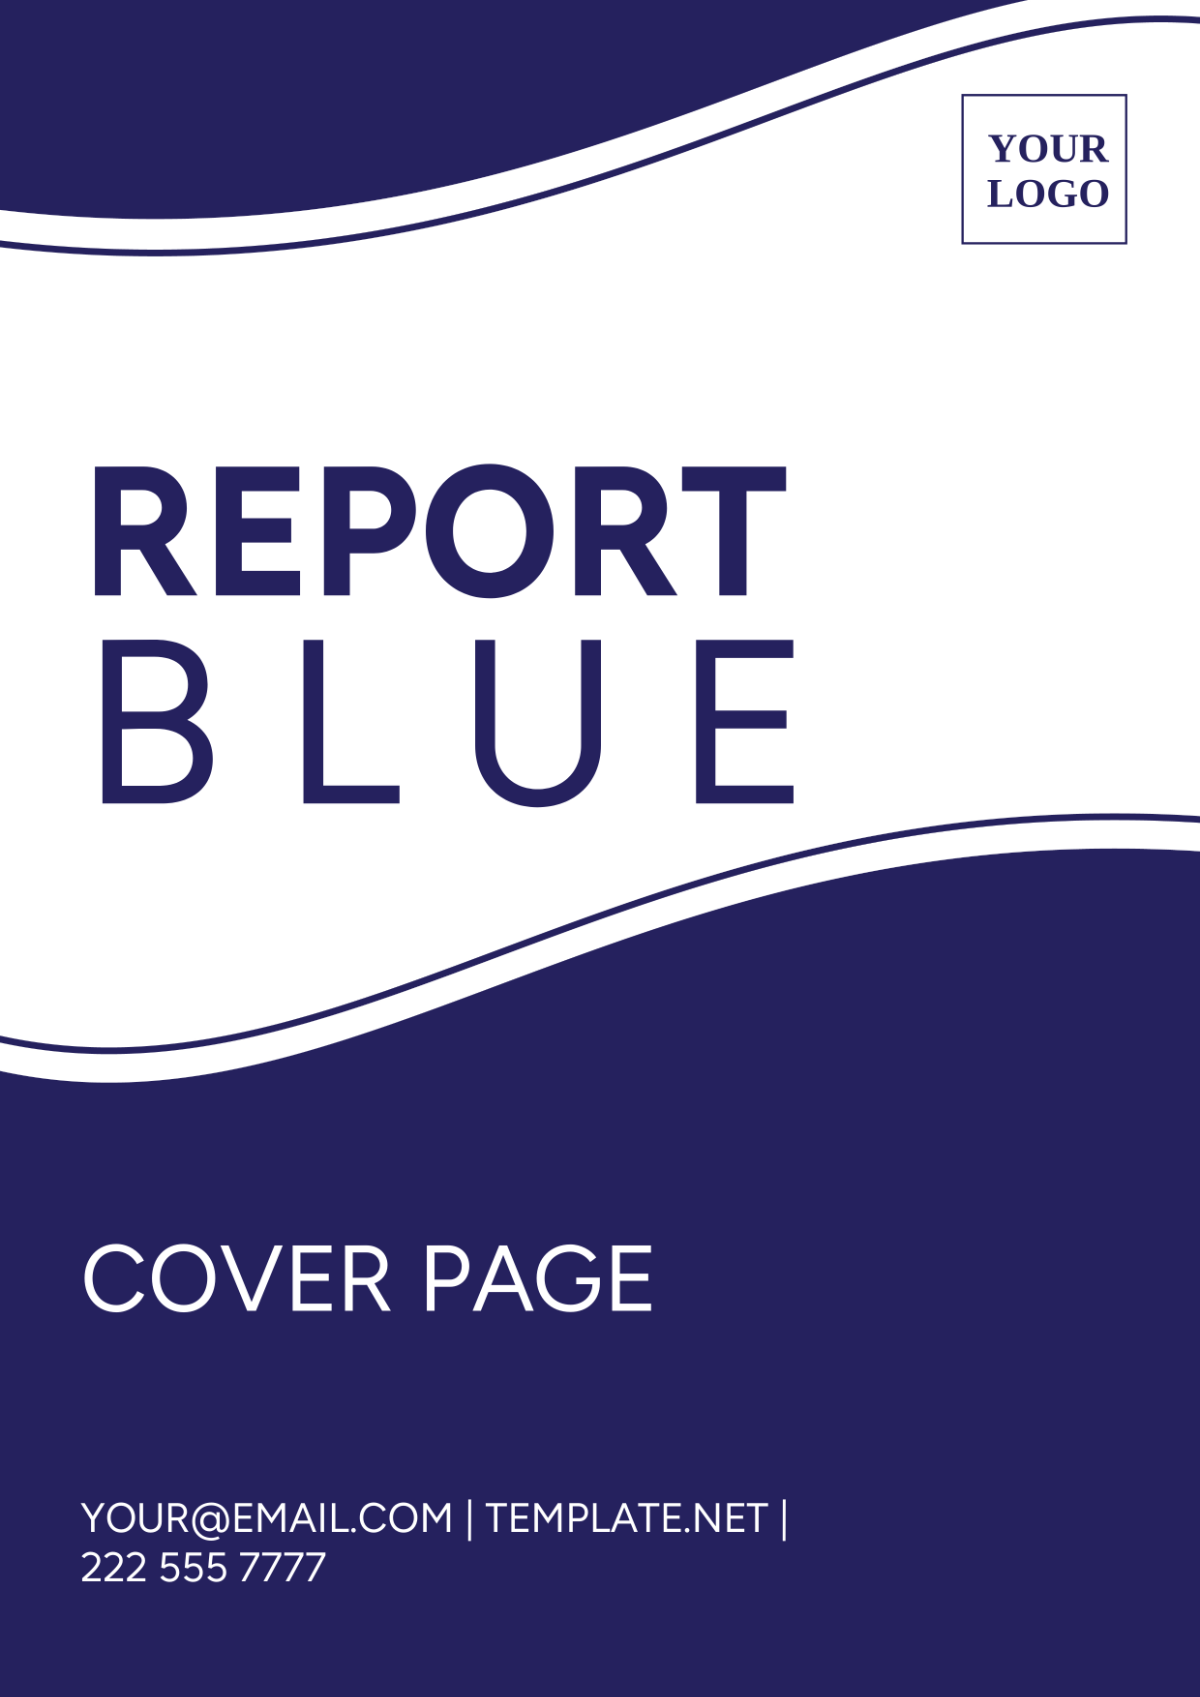 Report Blue Cover Page